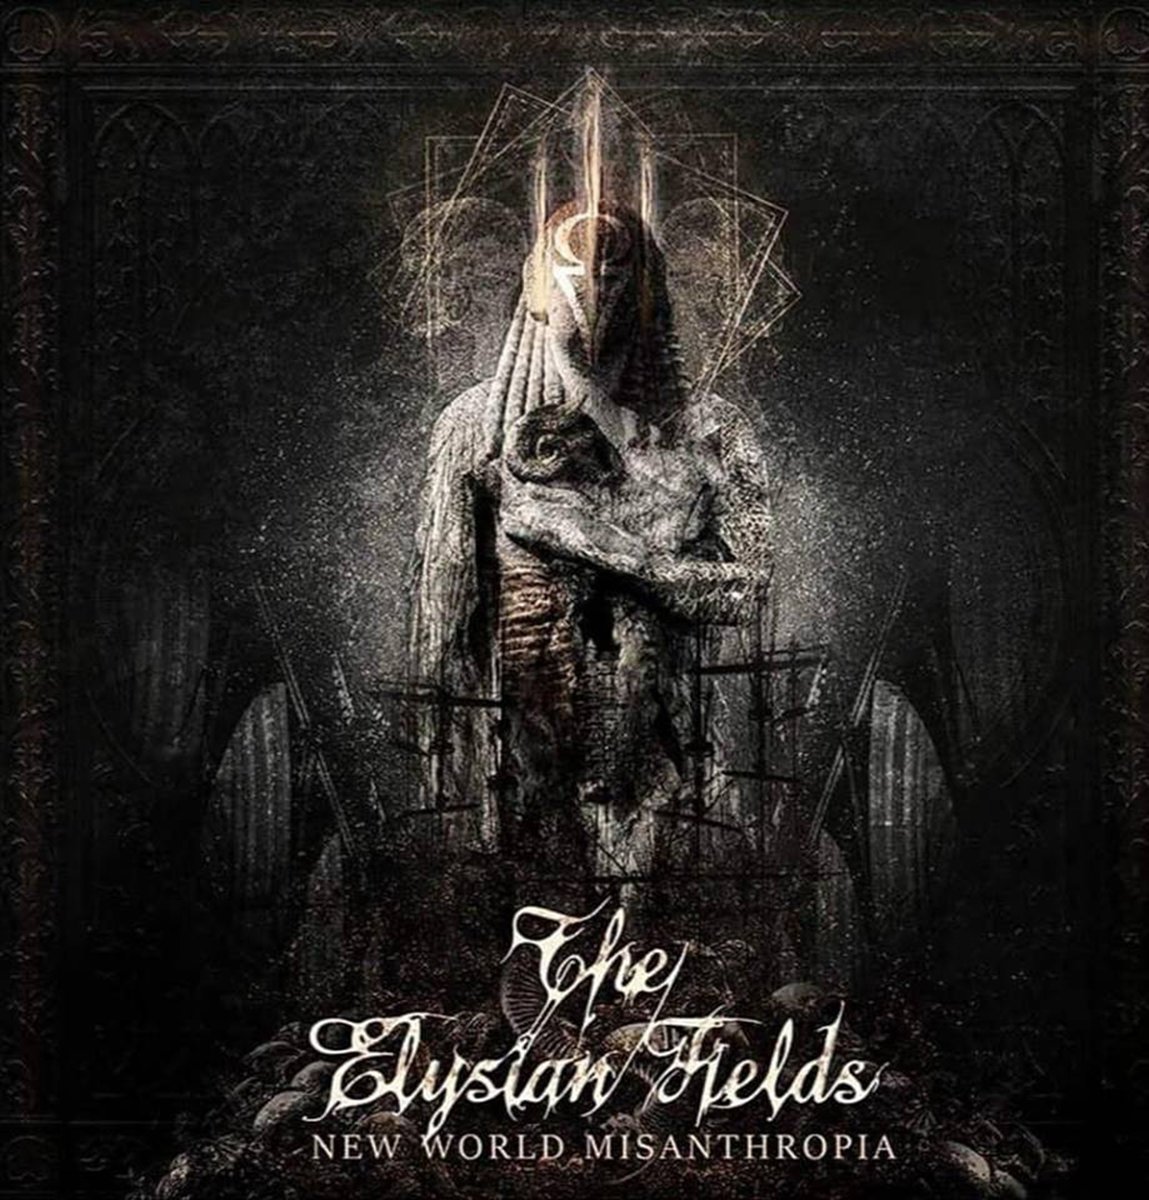 The Elysian Fields - New World Misanthropia (2019) FLAC Download